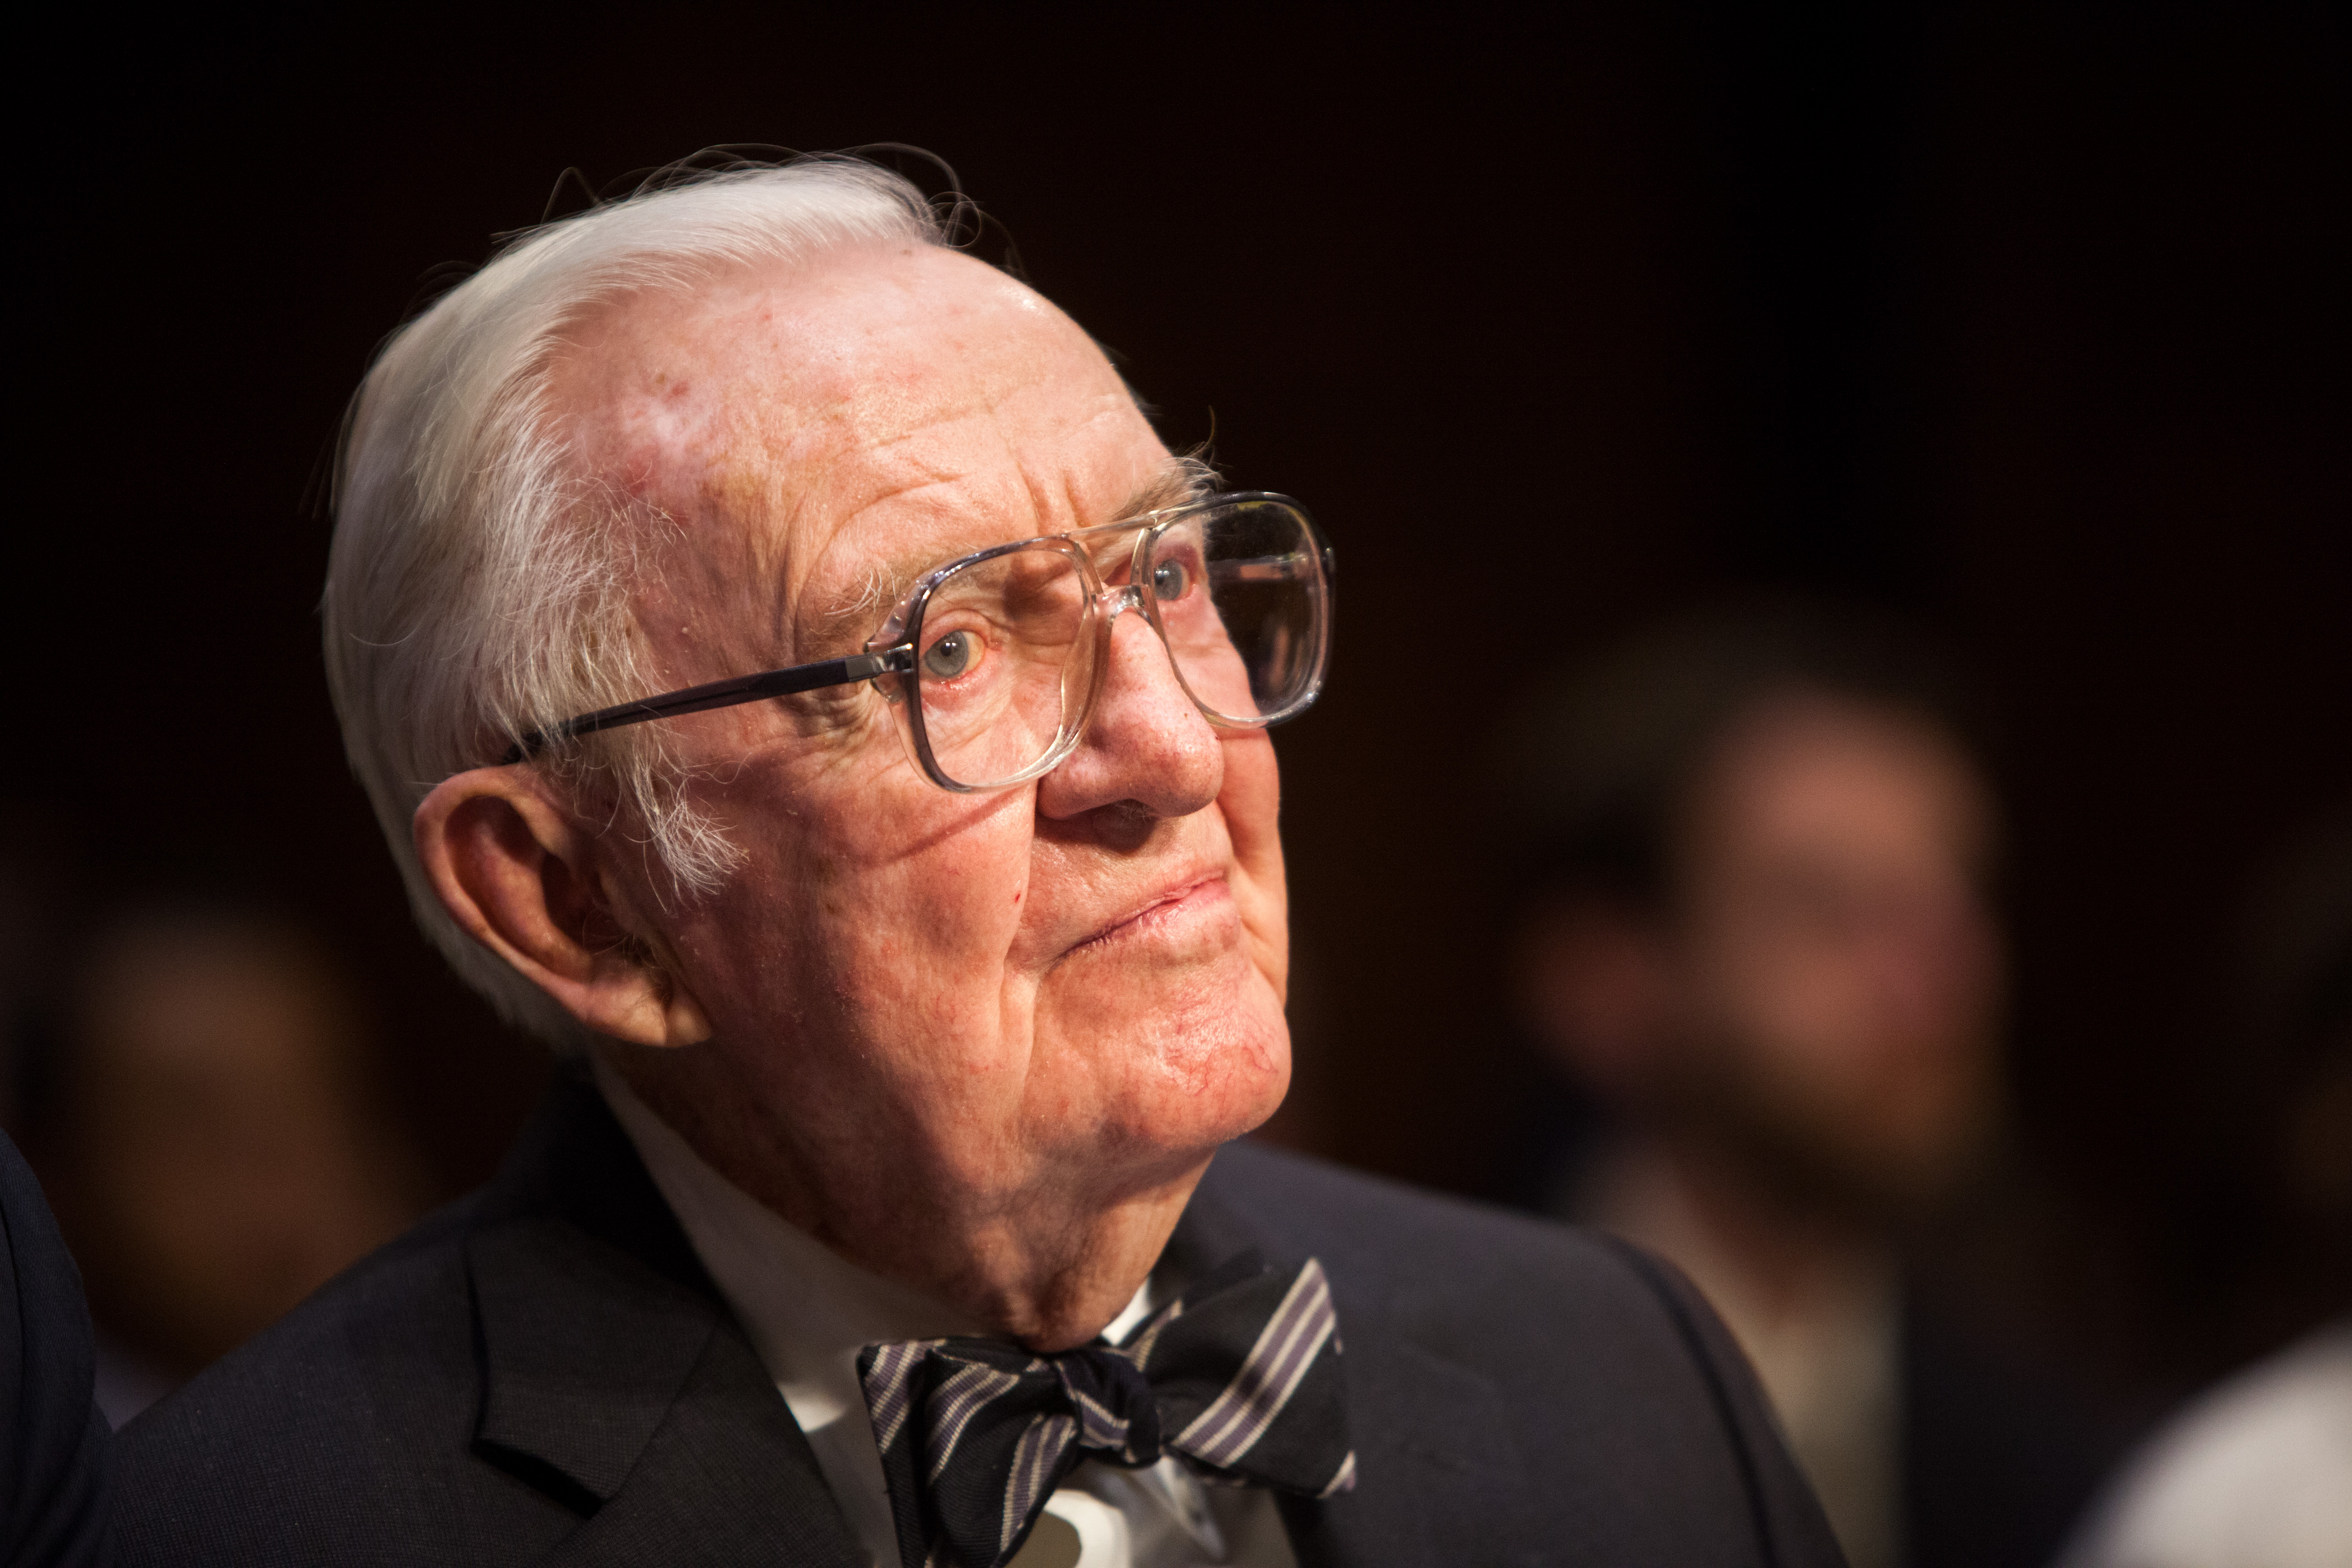 Former Supreme Court Justice John Paul Stevens testifies before the Senate Committee on Campaign Finance on Capitol Hill April 30, 2014 in Washington, DC. Stevens is testifying on a hearing entitled "Dollars and Sense: How Undisclosed Money and Post-McCutcheon Campaign Finance Will Affect 2014 and Beyond". (Photo by Allison Shelley/Getty Images) (Allison Shelley&mdash;Getty Images)